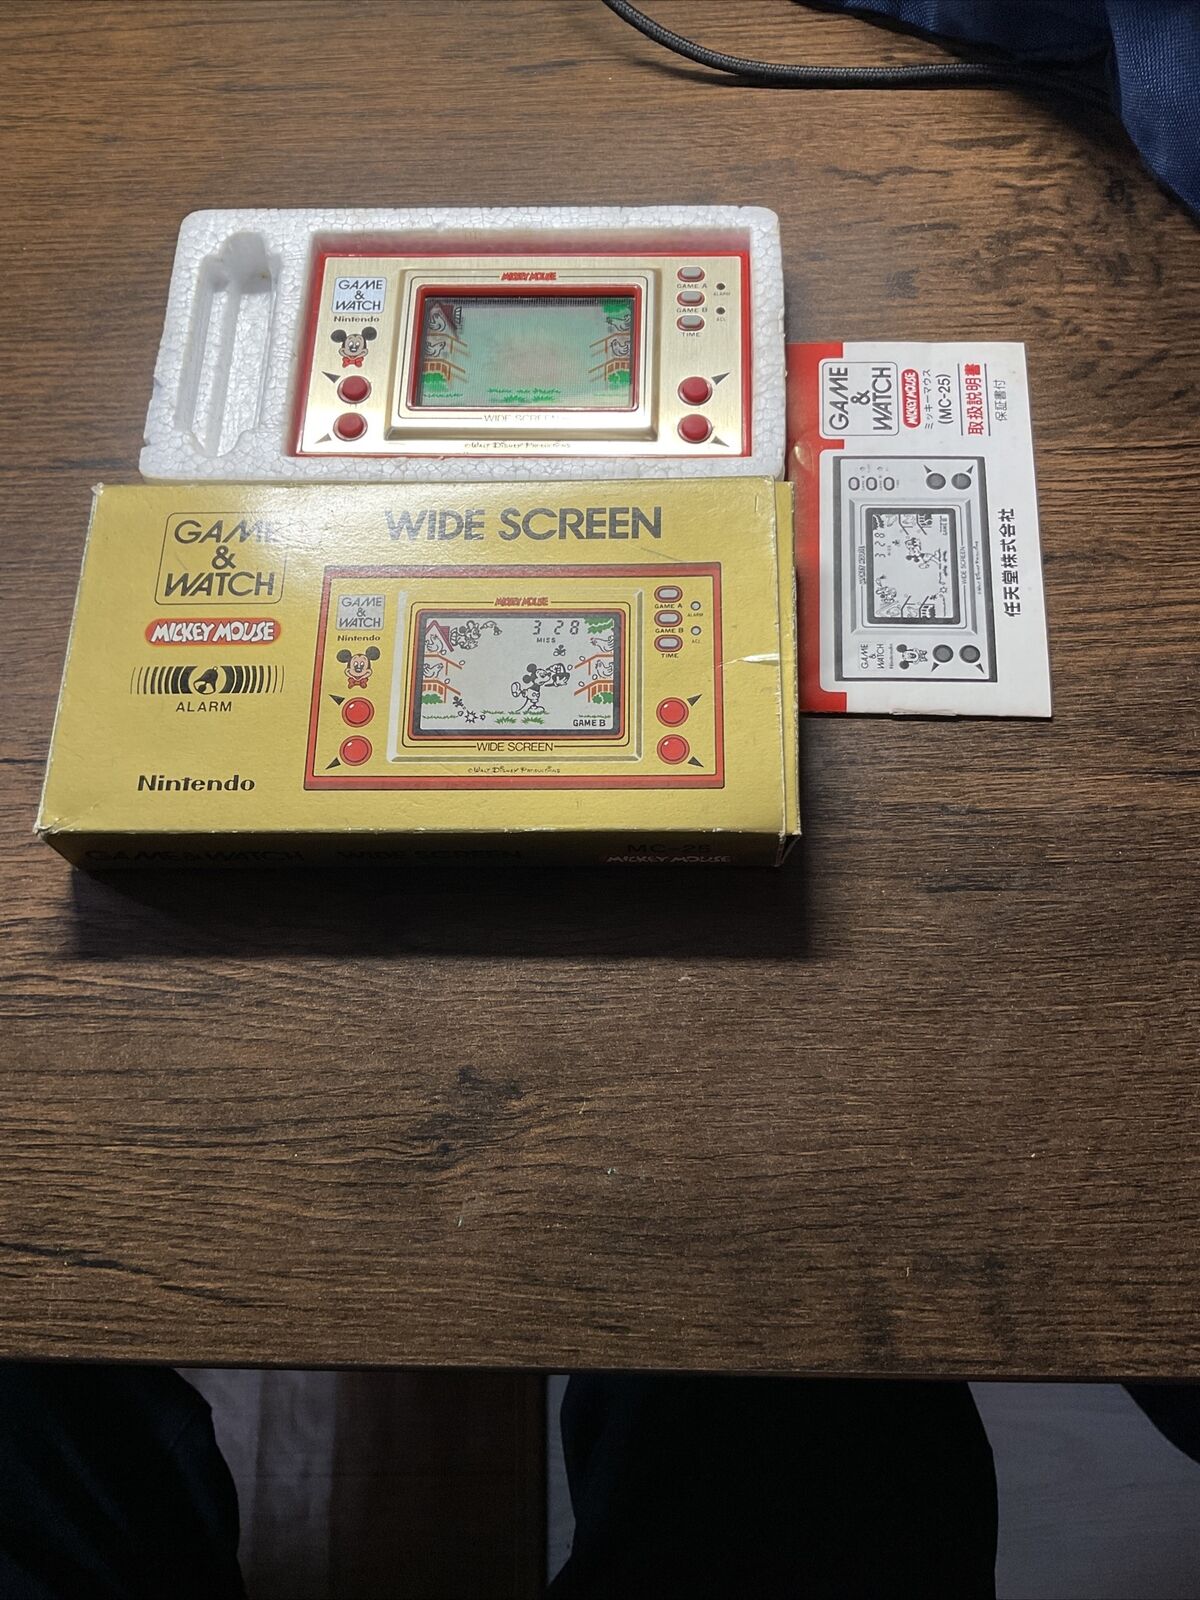 Nintendo Mickey mouse game and watch - used